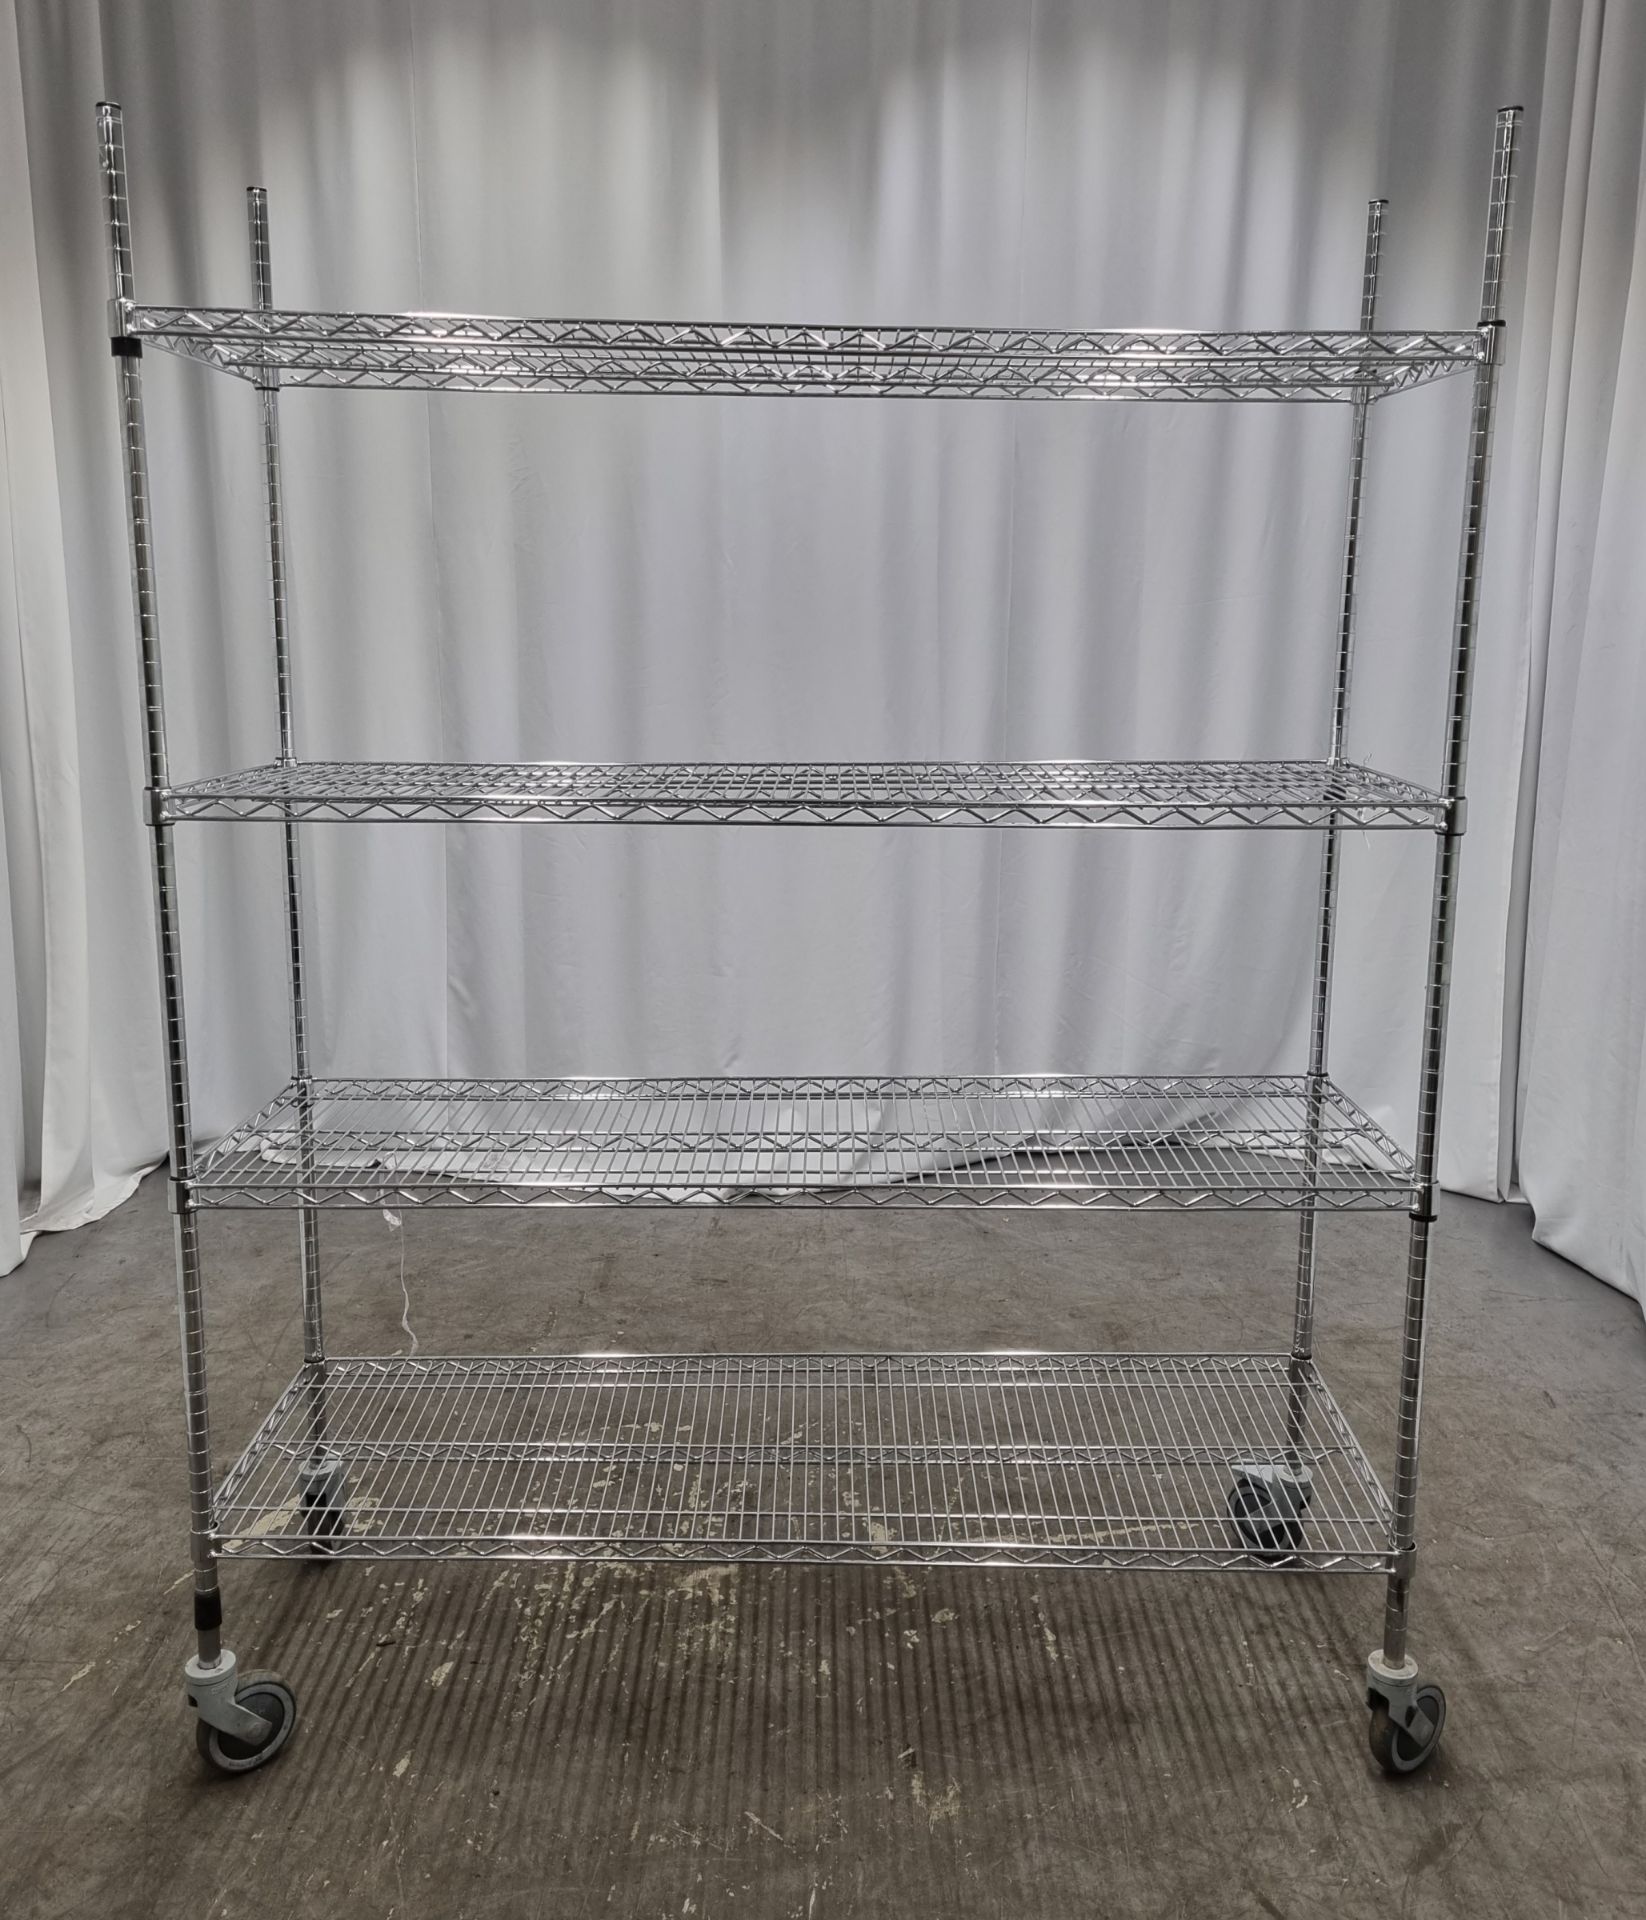 Stainless steel catering racking 4 x shelf on wheels